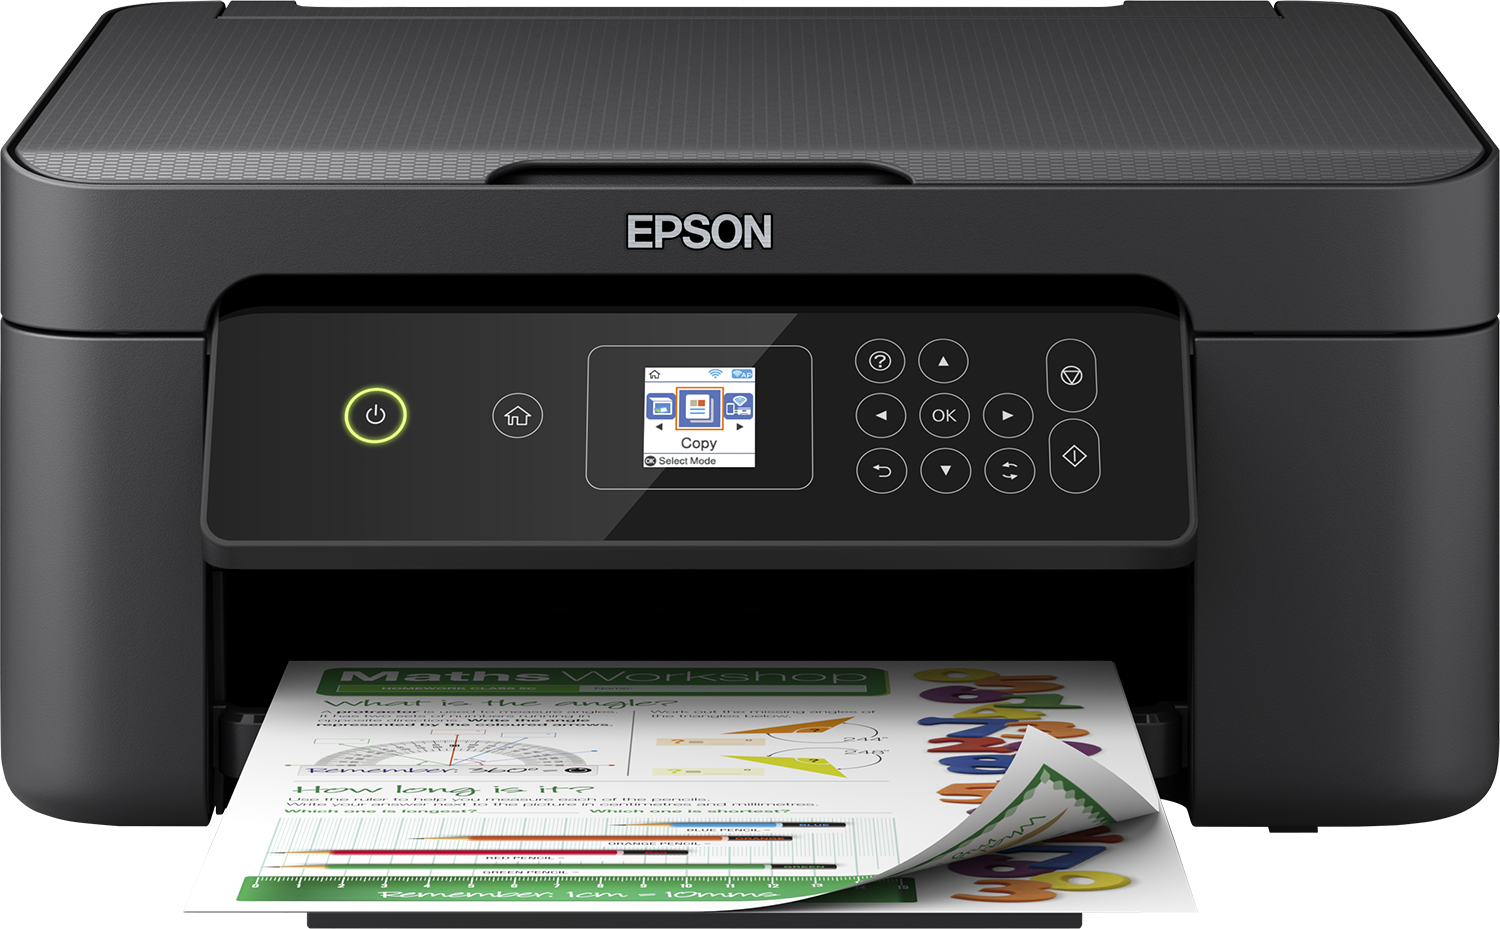 Step-by-step Driver Epson Printer L3100 Kali Linux Installation - Featured